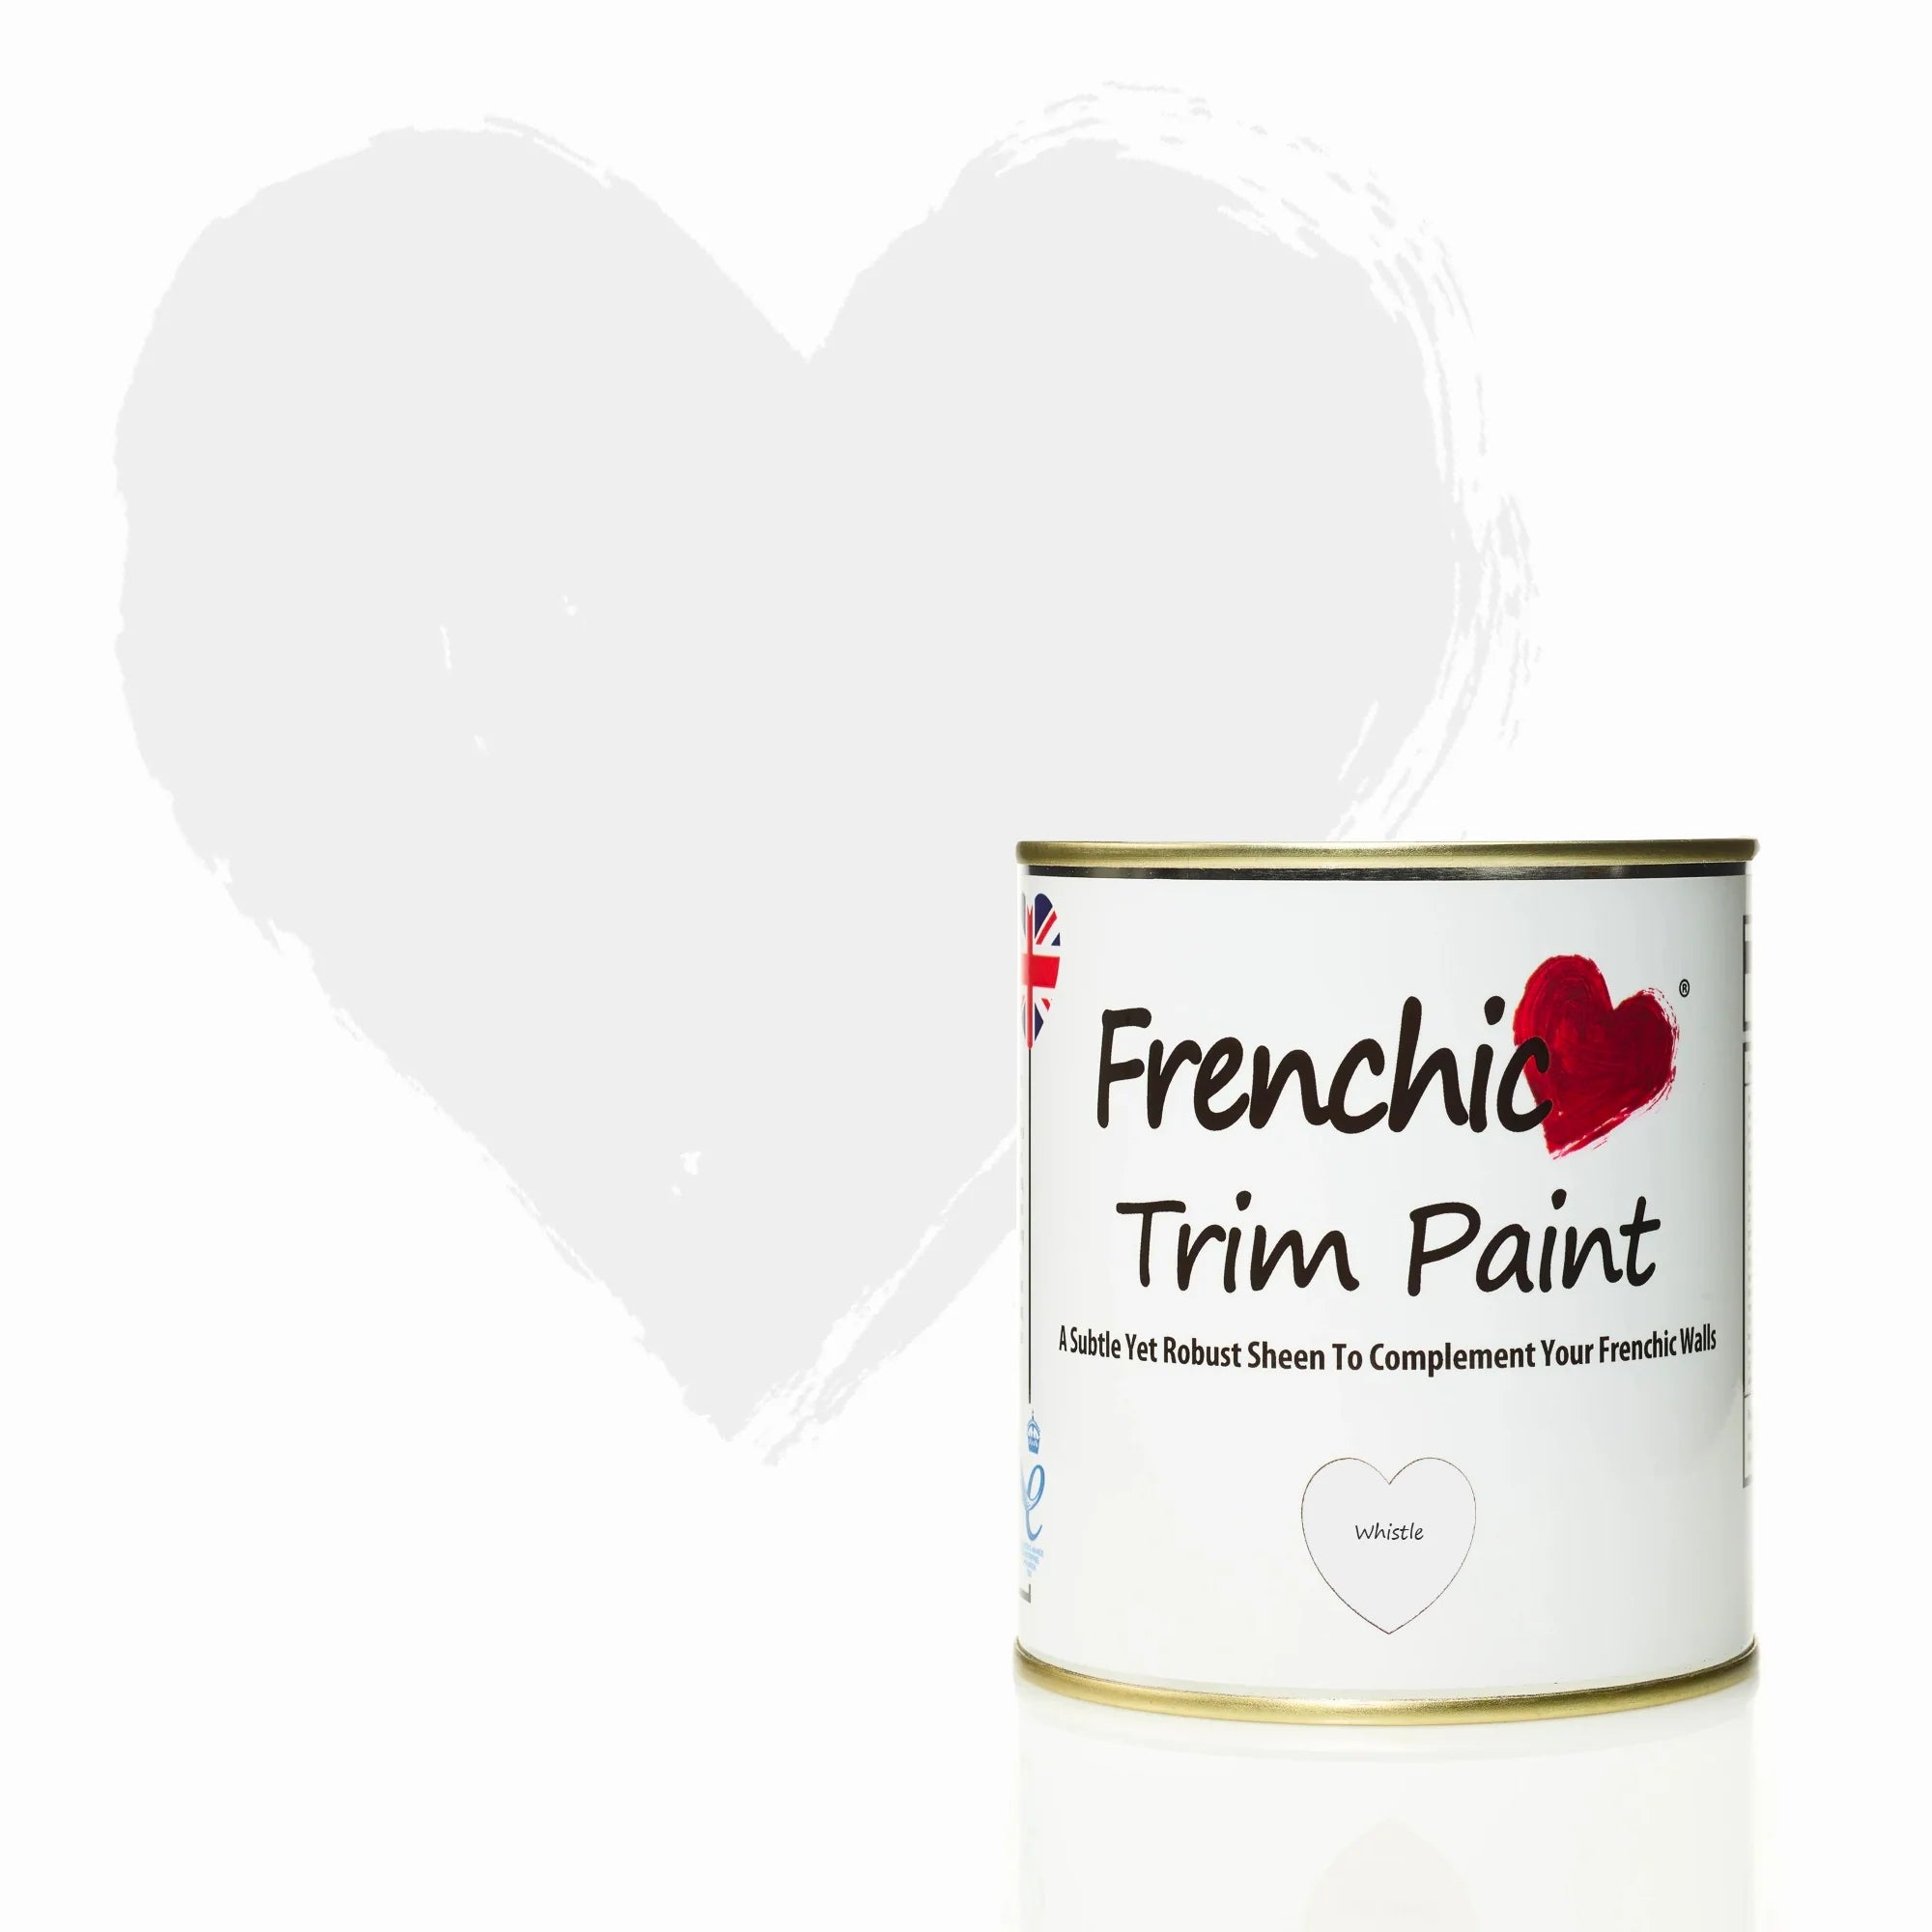 Frenchic Paint Whistle Trim Paint Frenchic Paint Trim Paint Range by Weirs of Baggot Street Irelands Largest and most Trusted Stockist of Frenchic Paint. Shop online for Nationwide and Same Day Dublin Delivery